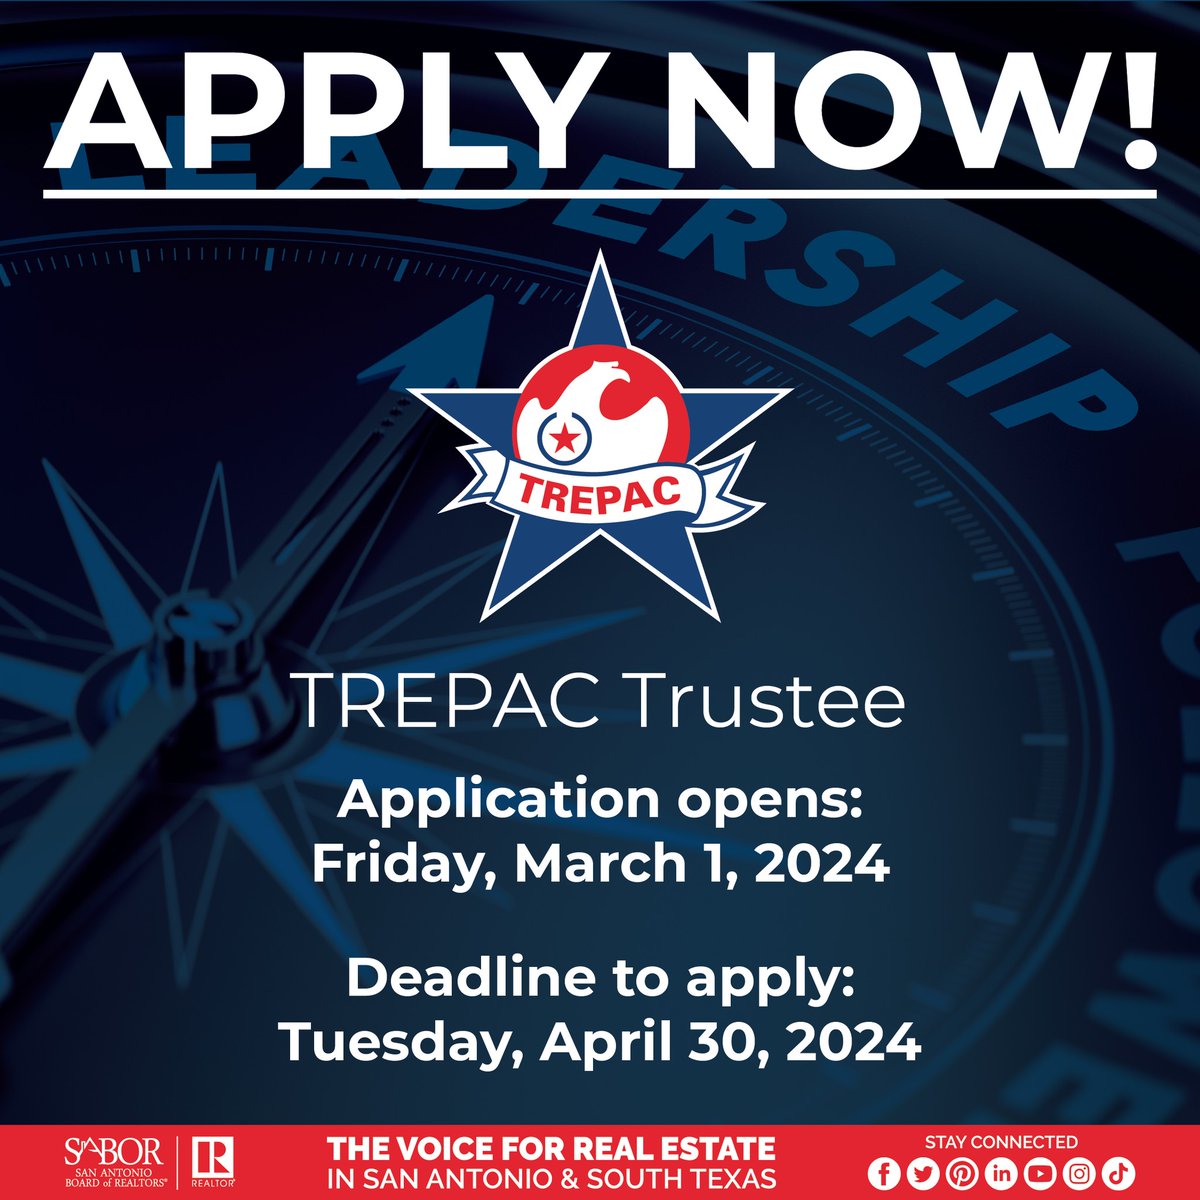 Don't miss out on the opportunity to become a TREPAC Trustee! TREPAC Trustees are dedicated volunteers from the association membership who recognize the importance of the PAC. The deadline to apply is Tuesday, April 30. Apply here: bit.ly/49zjx1X